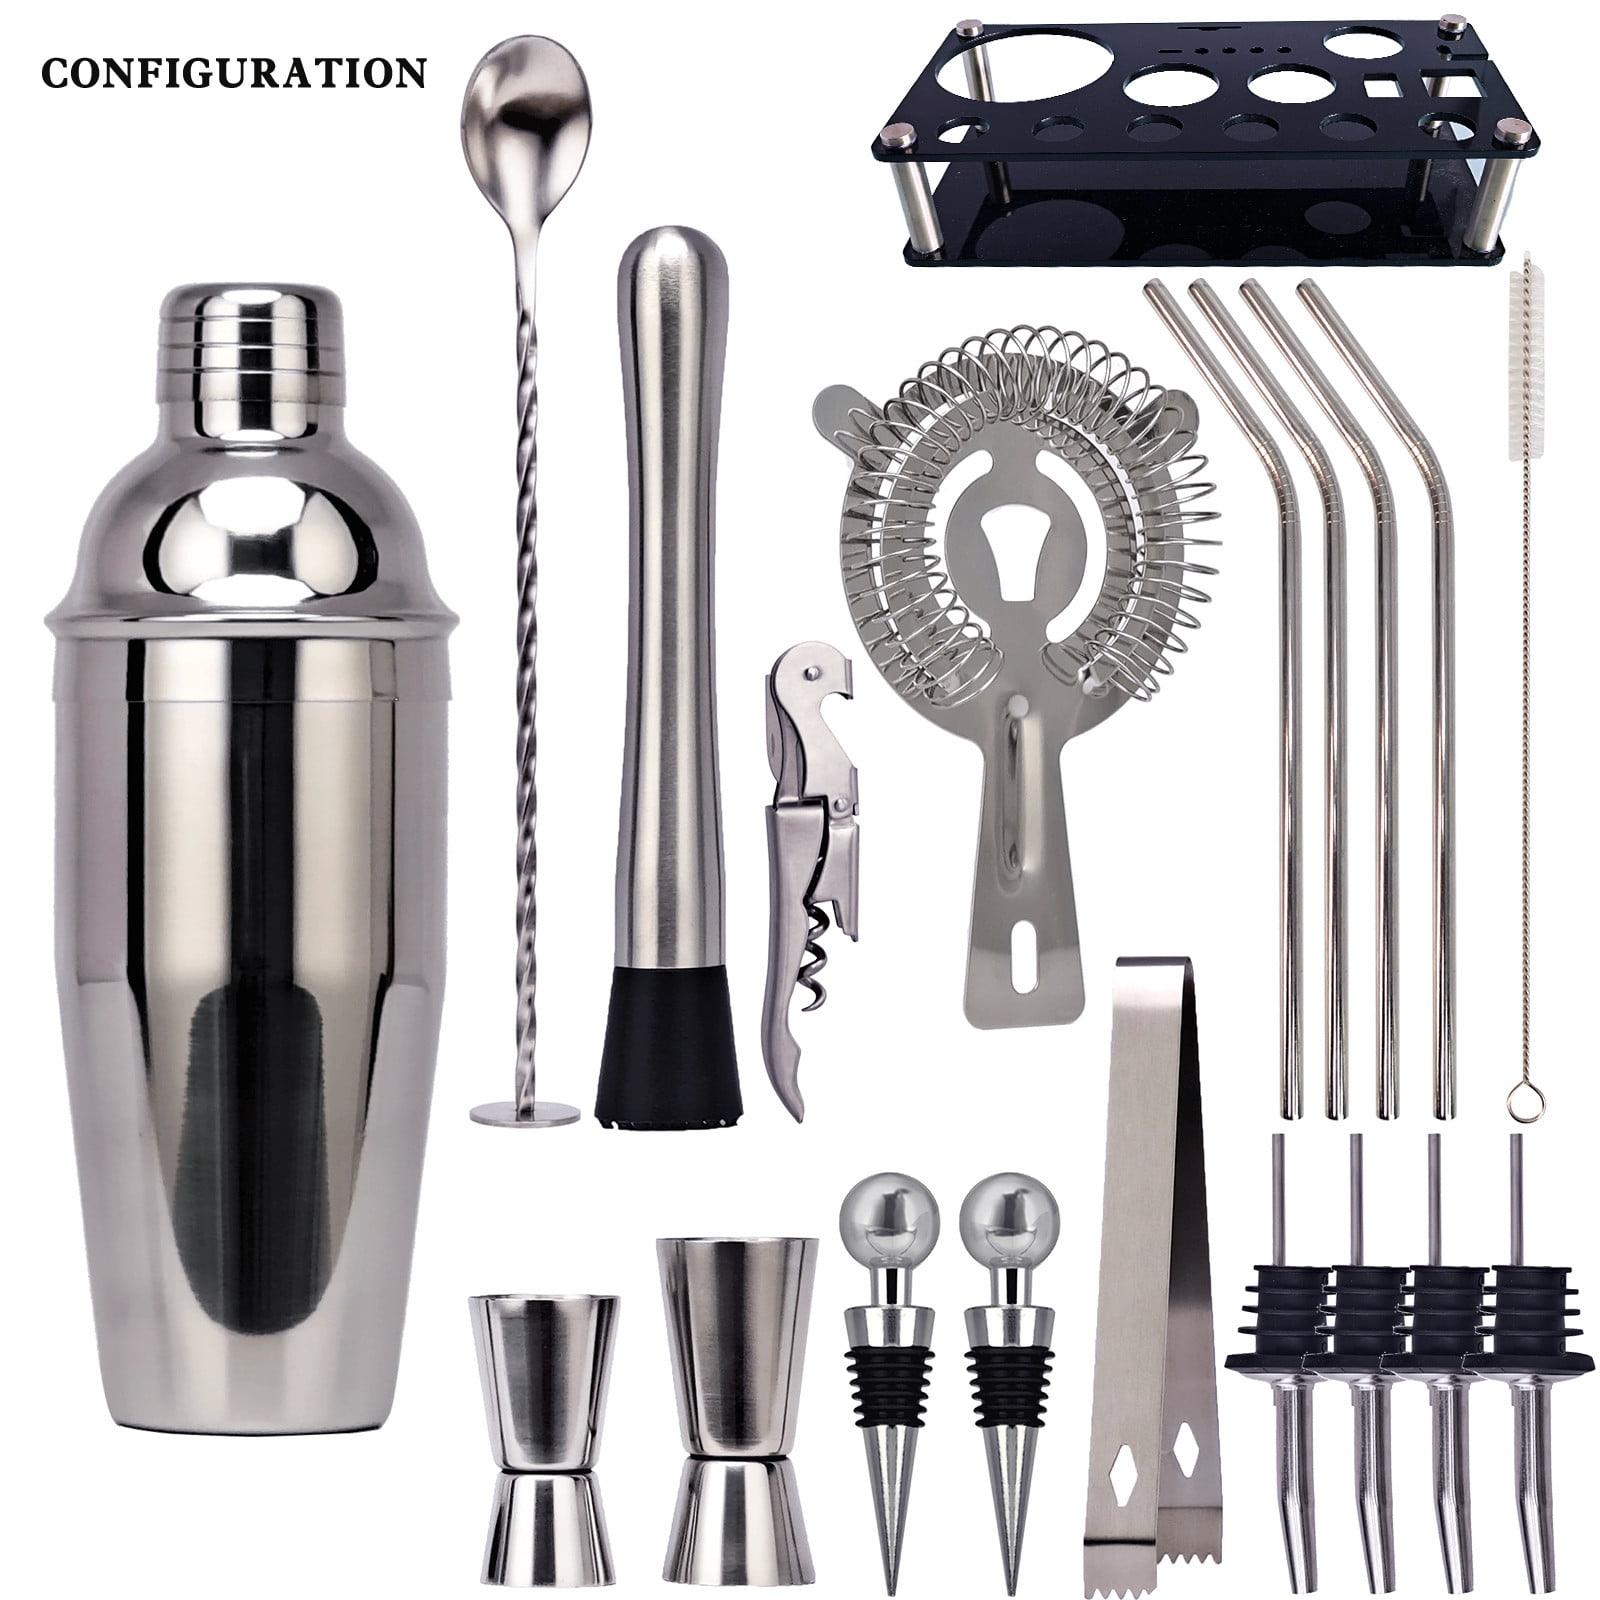  AYAOQIANG Cocktail Making Set, Cocktail Shaker Set 750ml  Stainless Steel Bar Tool Set Bartender Kit with Display Stand : Home &  Kitchen